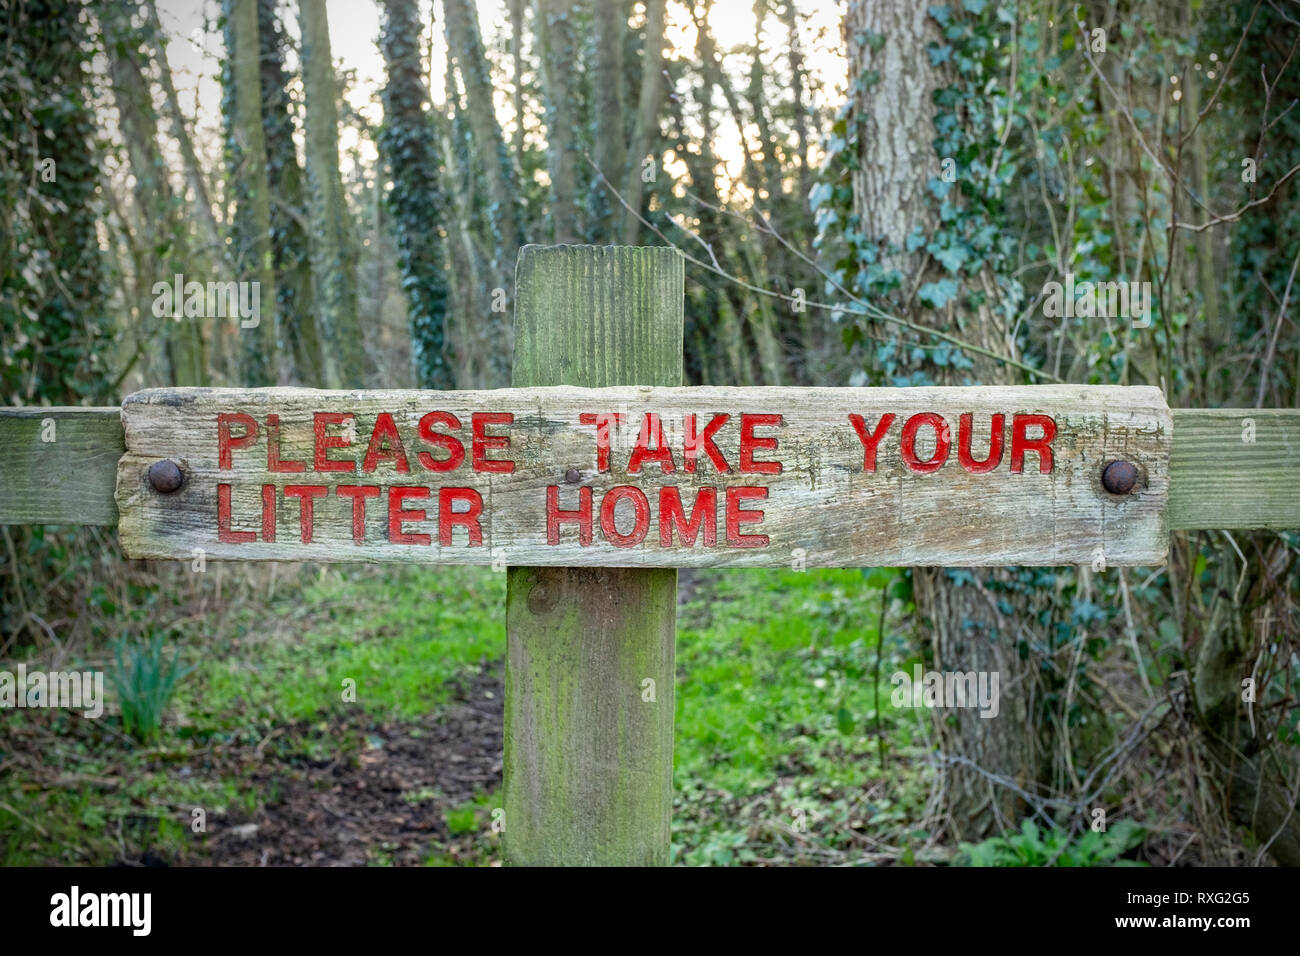 Please take your litter home sign in the Cheshire countryside UK Stock Photo